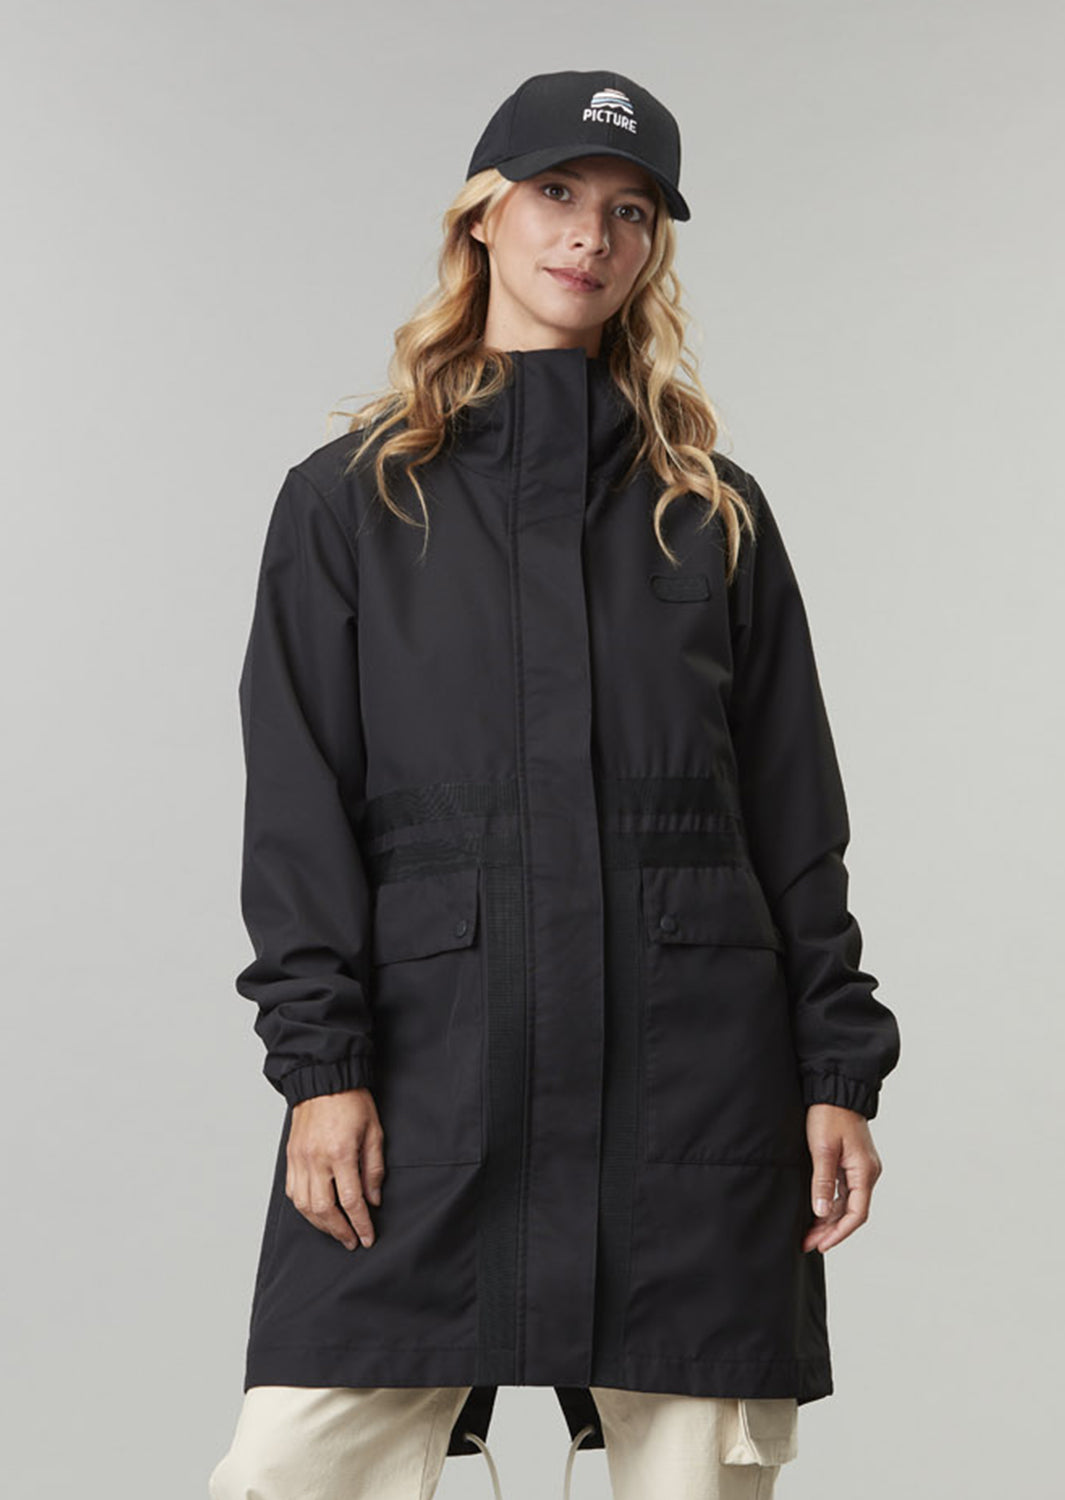 Picture Organic - W's Geraldeen Jacket - Recycled Polyester - Weekendbee - sustainable sportswear